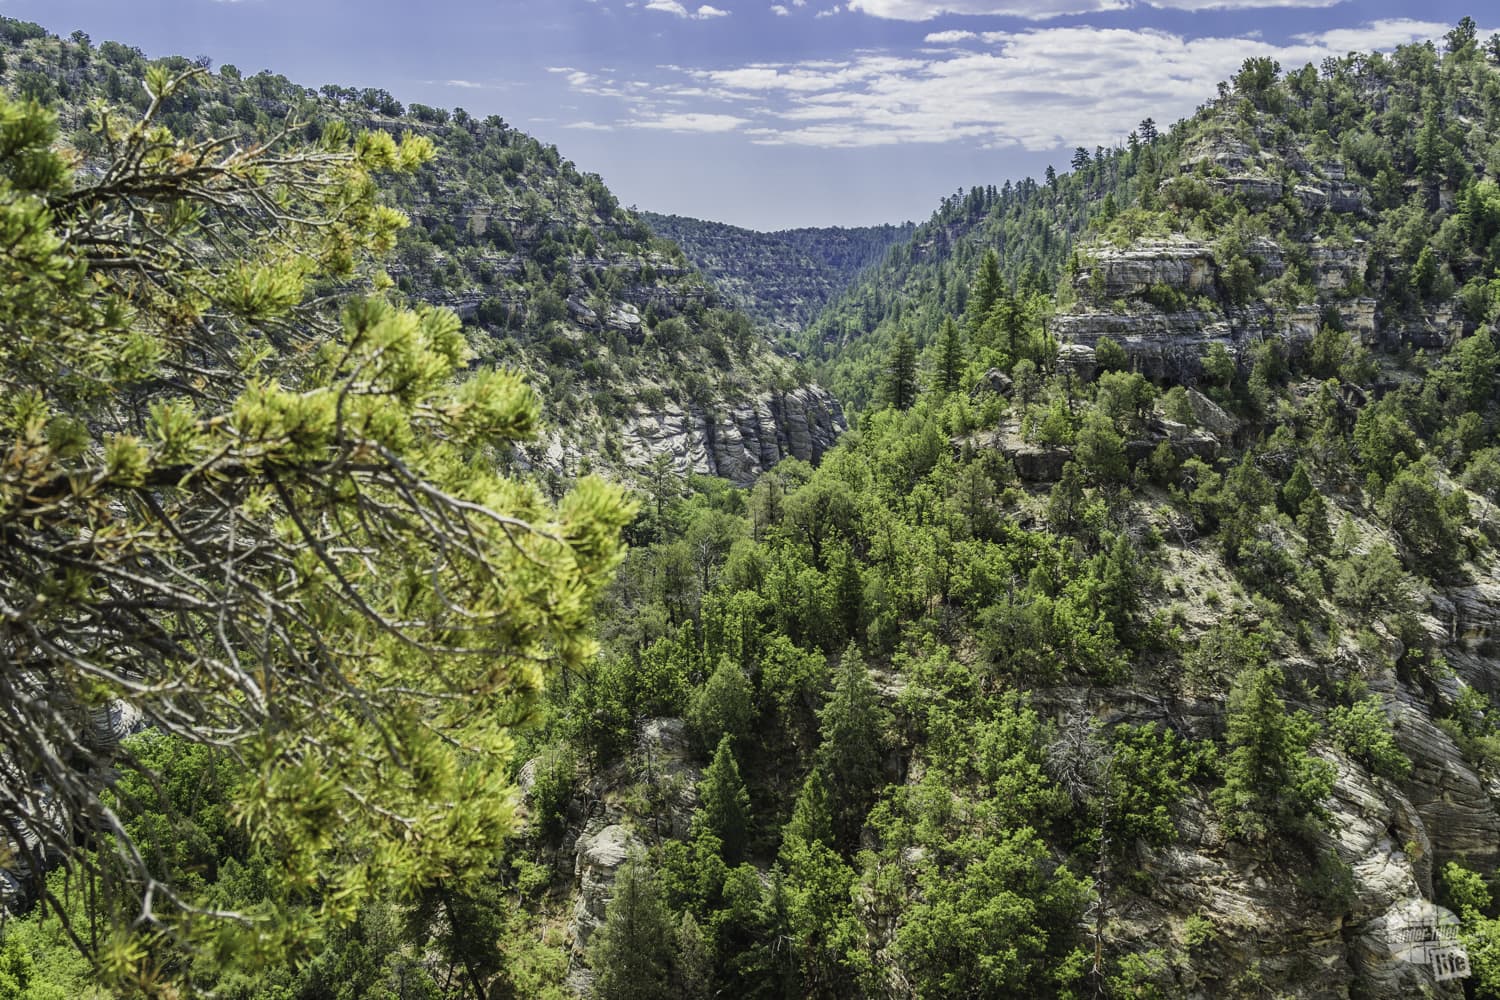 Walnut Canyon National Monument is one of three national monuments in the Flagstaff area.